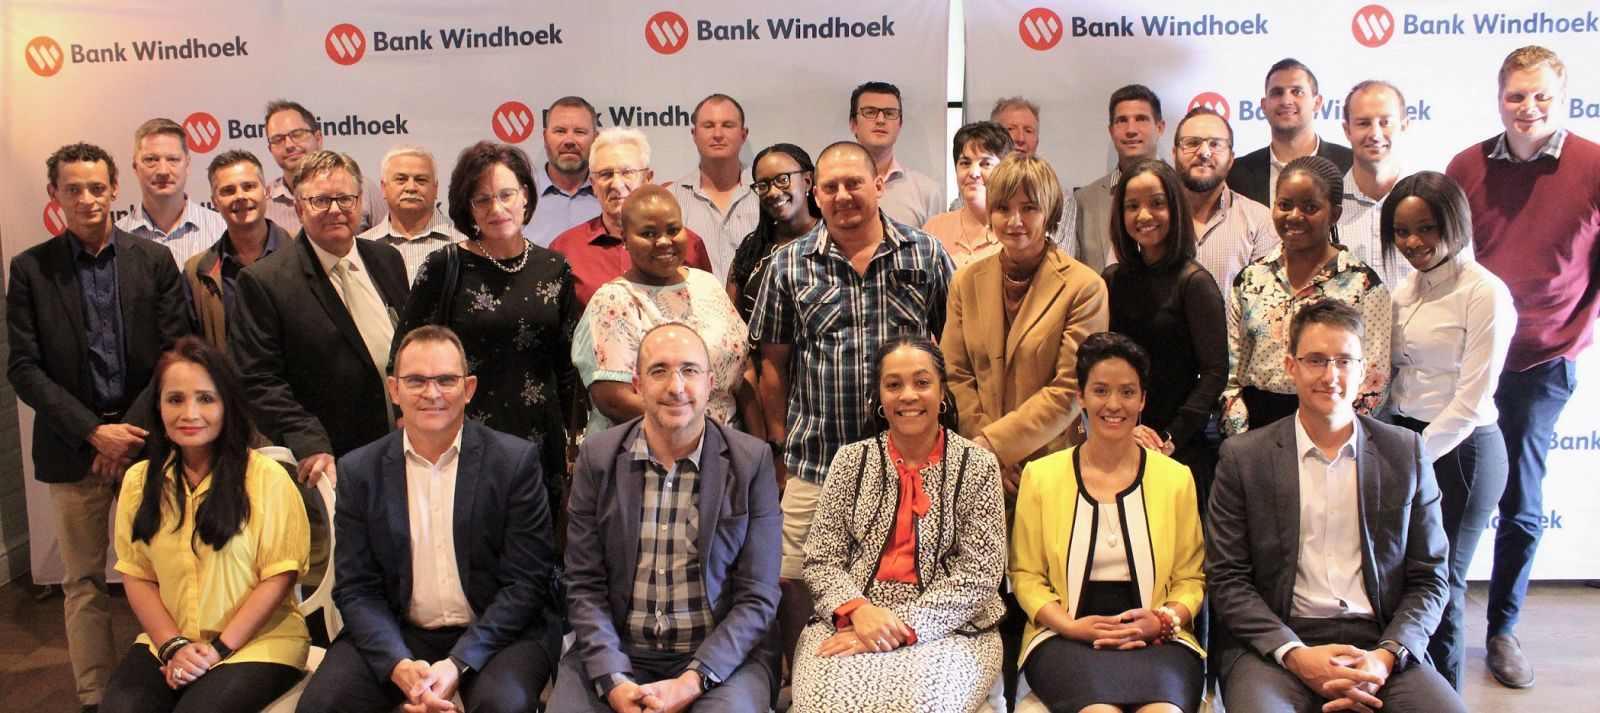 Bank Windhoek has issued a green bond which will be used to finance EDGE-certified projects in Namibia. 